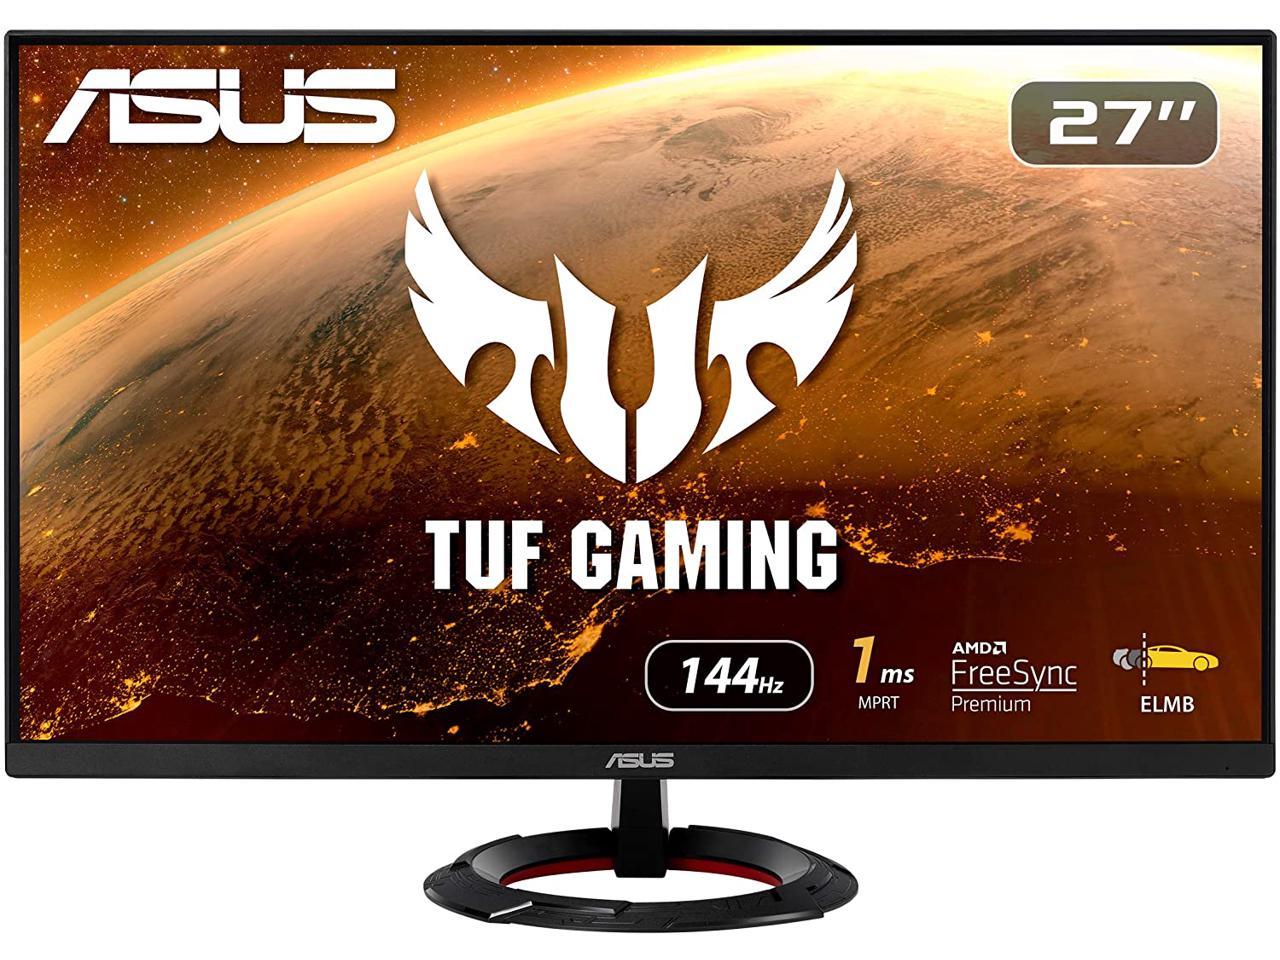 Asus Tuf Gaming Vg279Q1R 27 Inch 1000:1 1Ms Hdmi/Displayport/Earphone Jack Led Non-Glare Gaming Monitor W/ Speakers